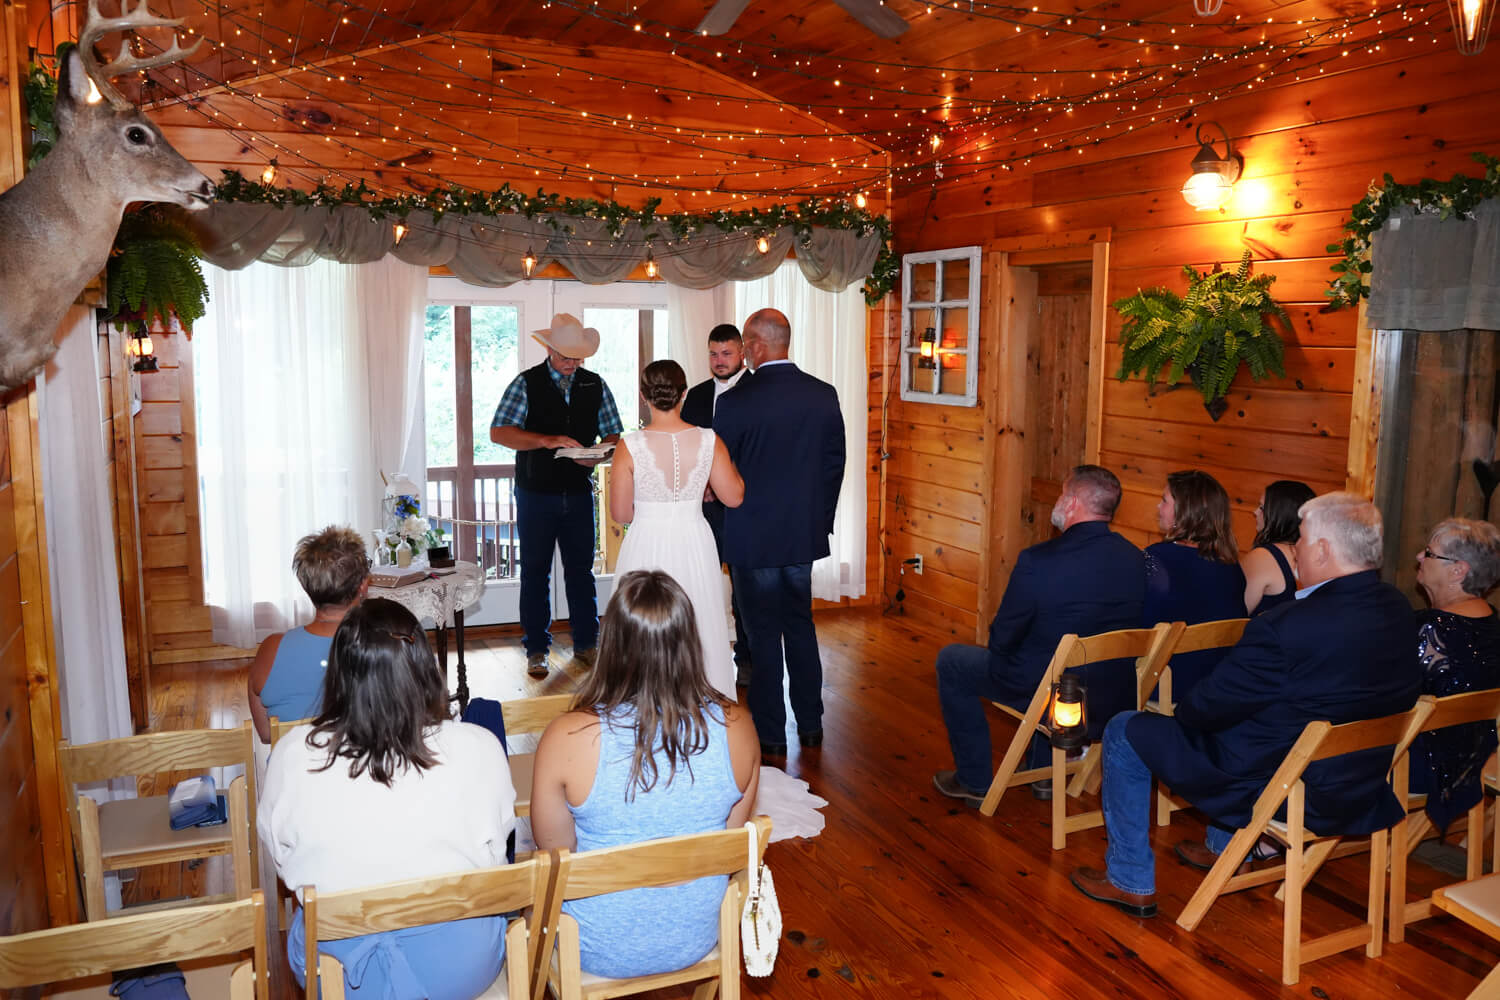 Tennessee Wedding Chapel with wooden pine walls, fairy lights, lanterns and a deer head on the wall as guests seated in wooden chairs watch a preacher with a cowboy hat ask the father who gives the bride away